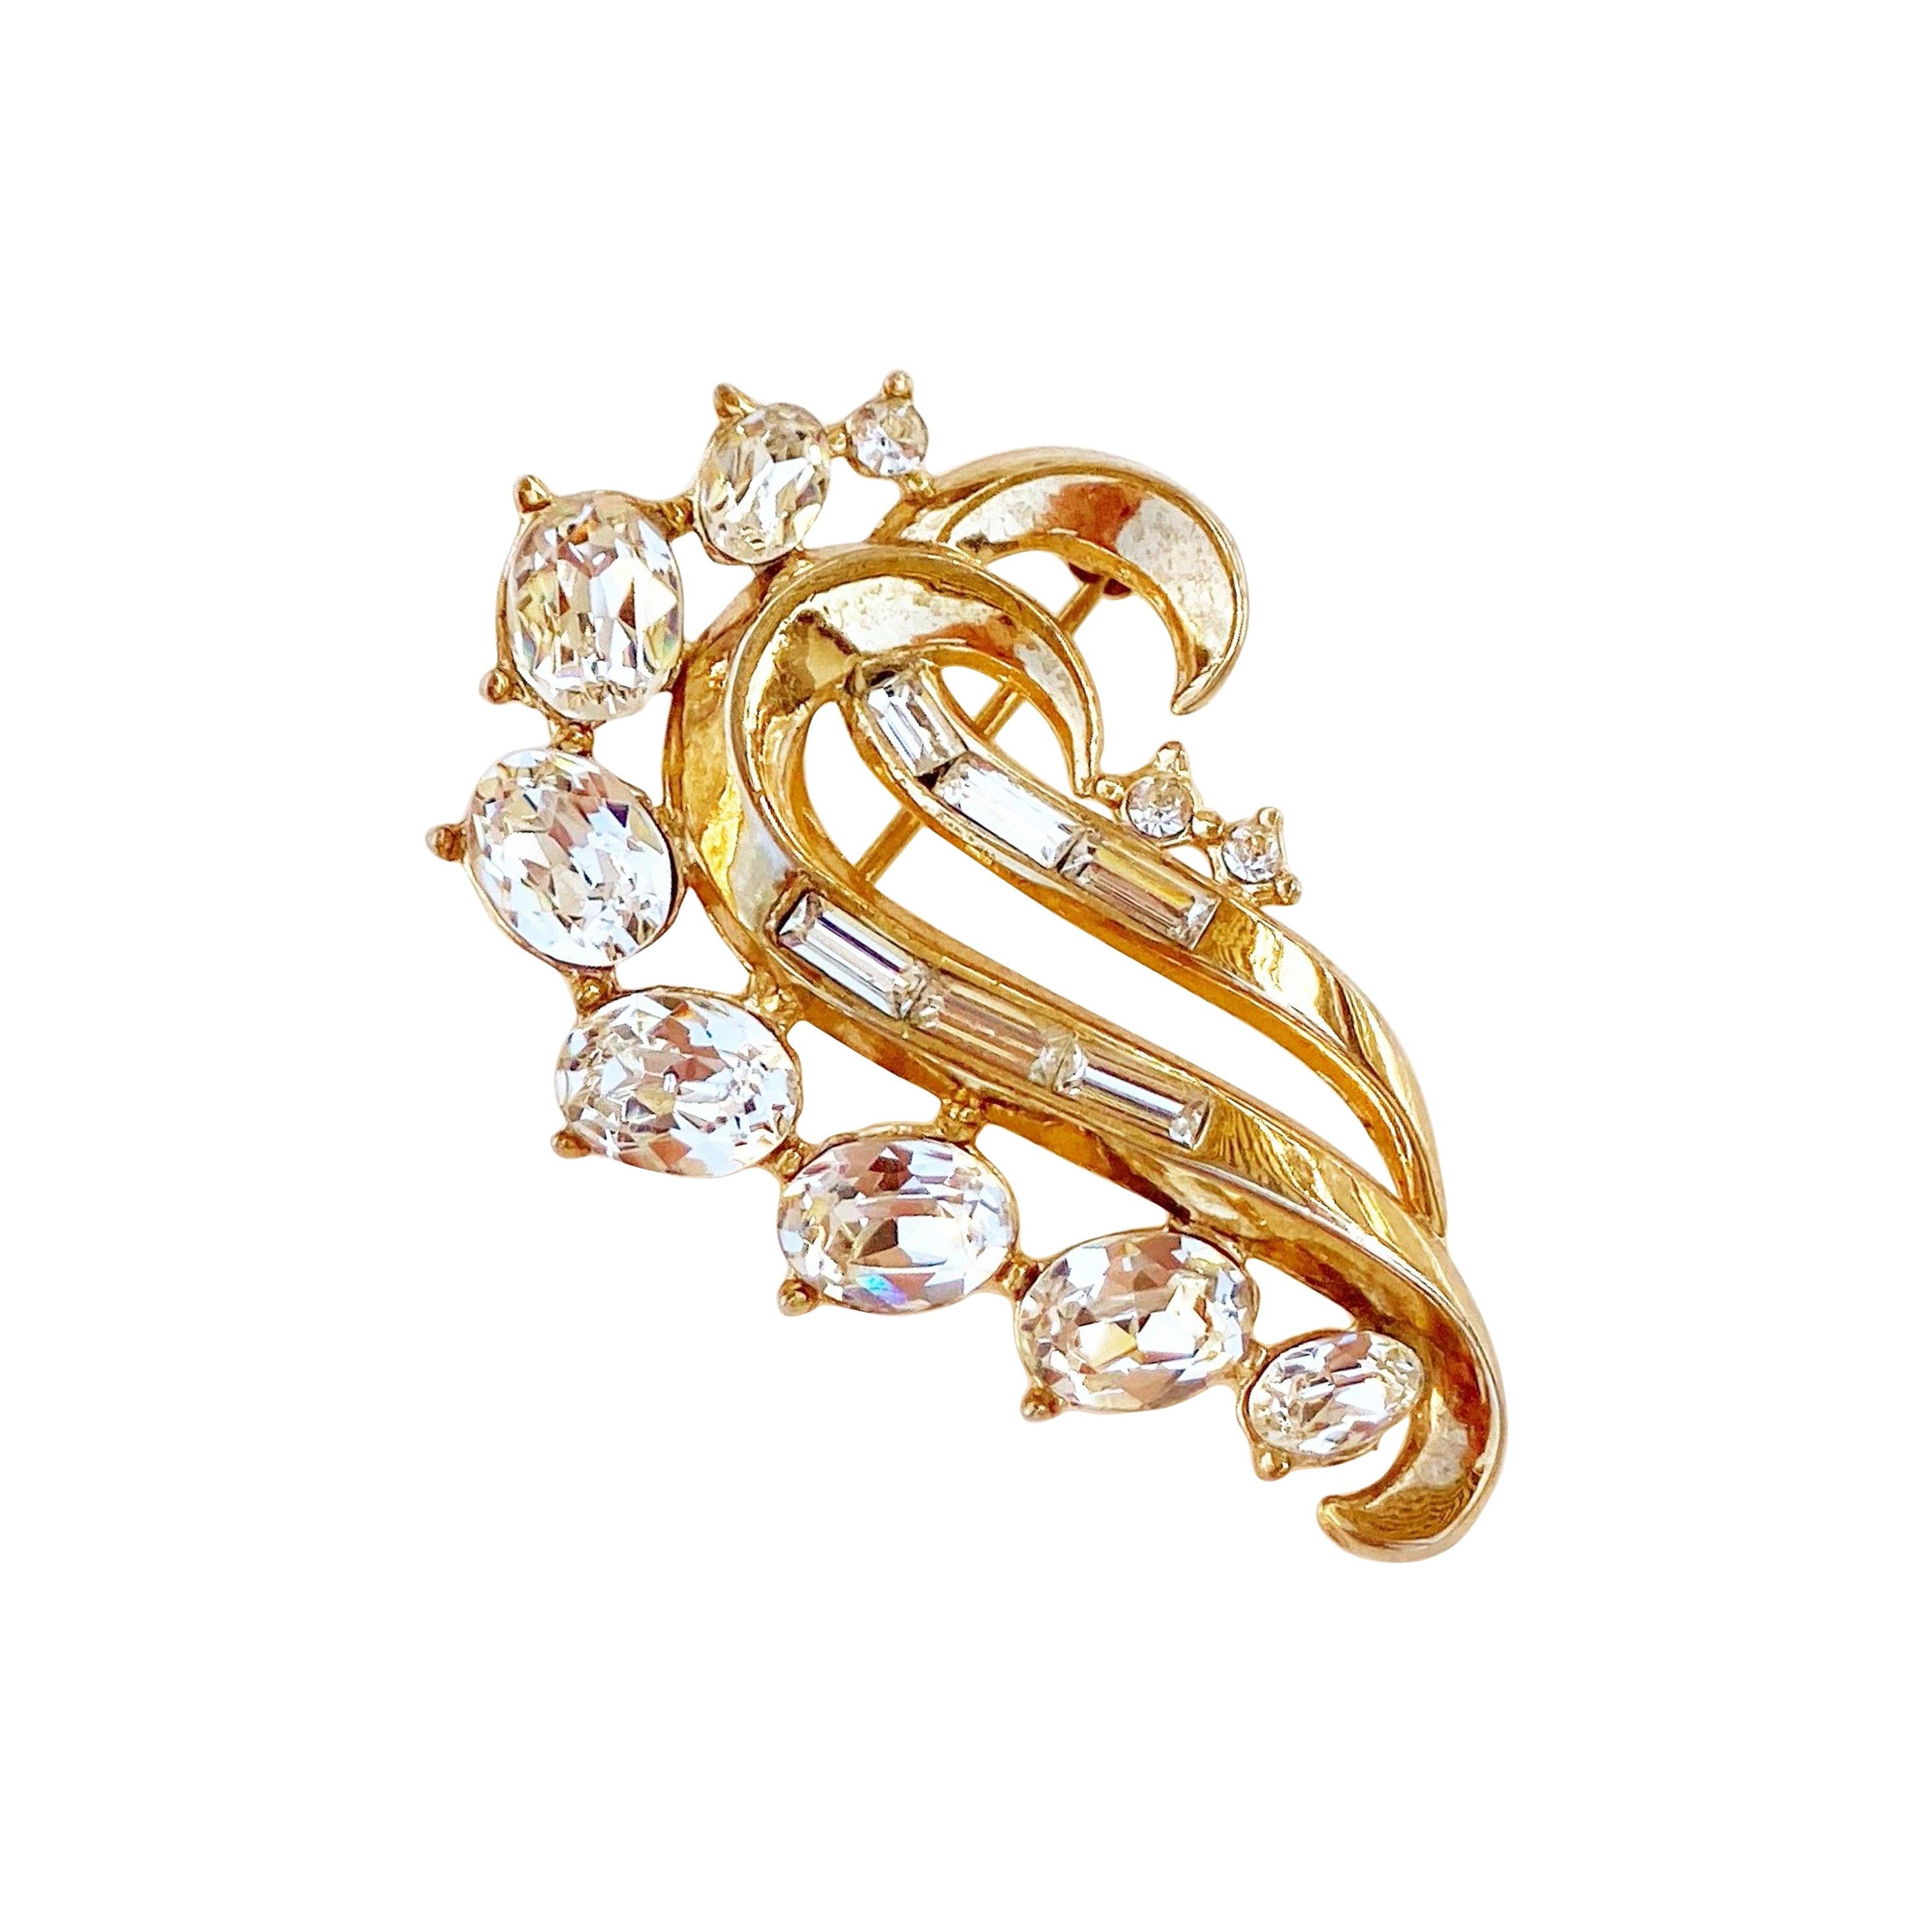 Gilded Swirl Brooch With Crystals By Alfred Philippe For Crown Trifari, 1953